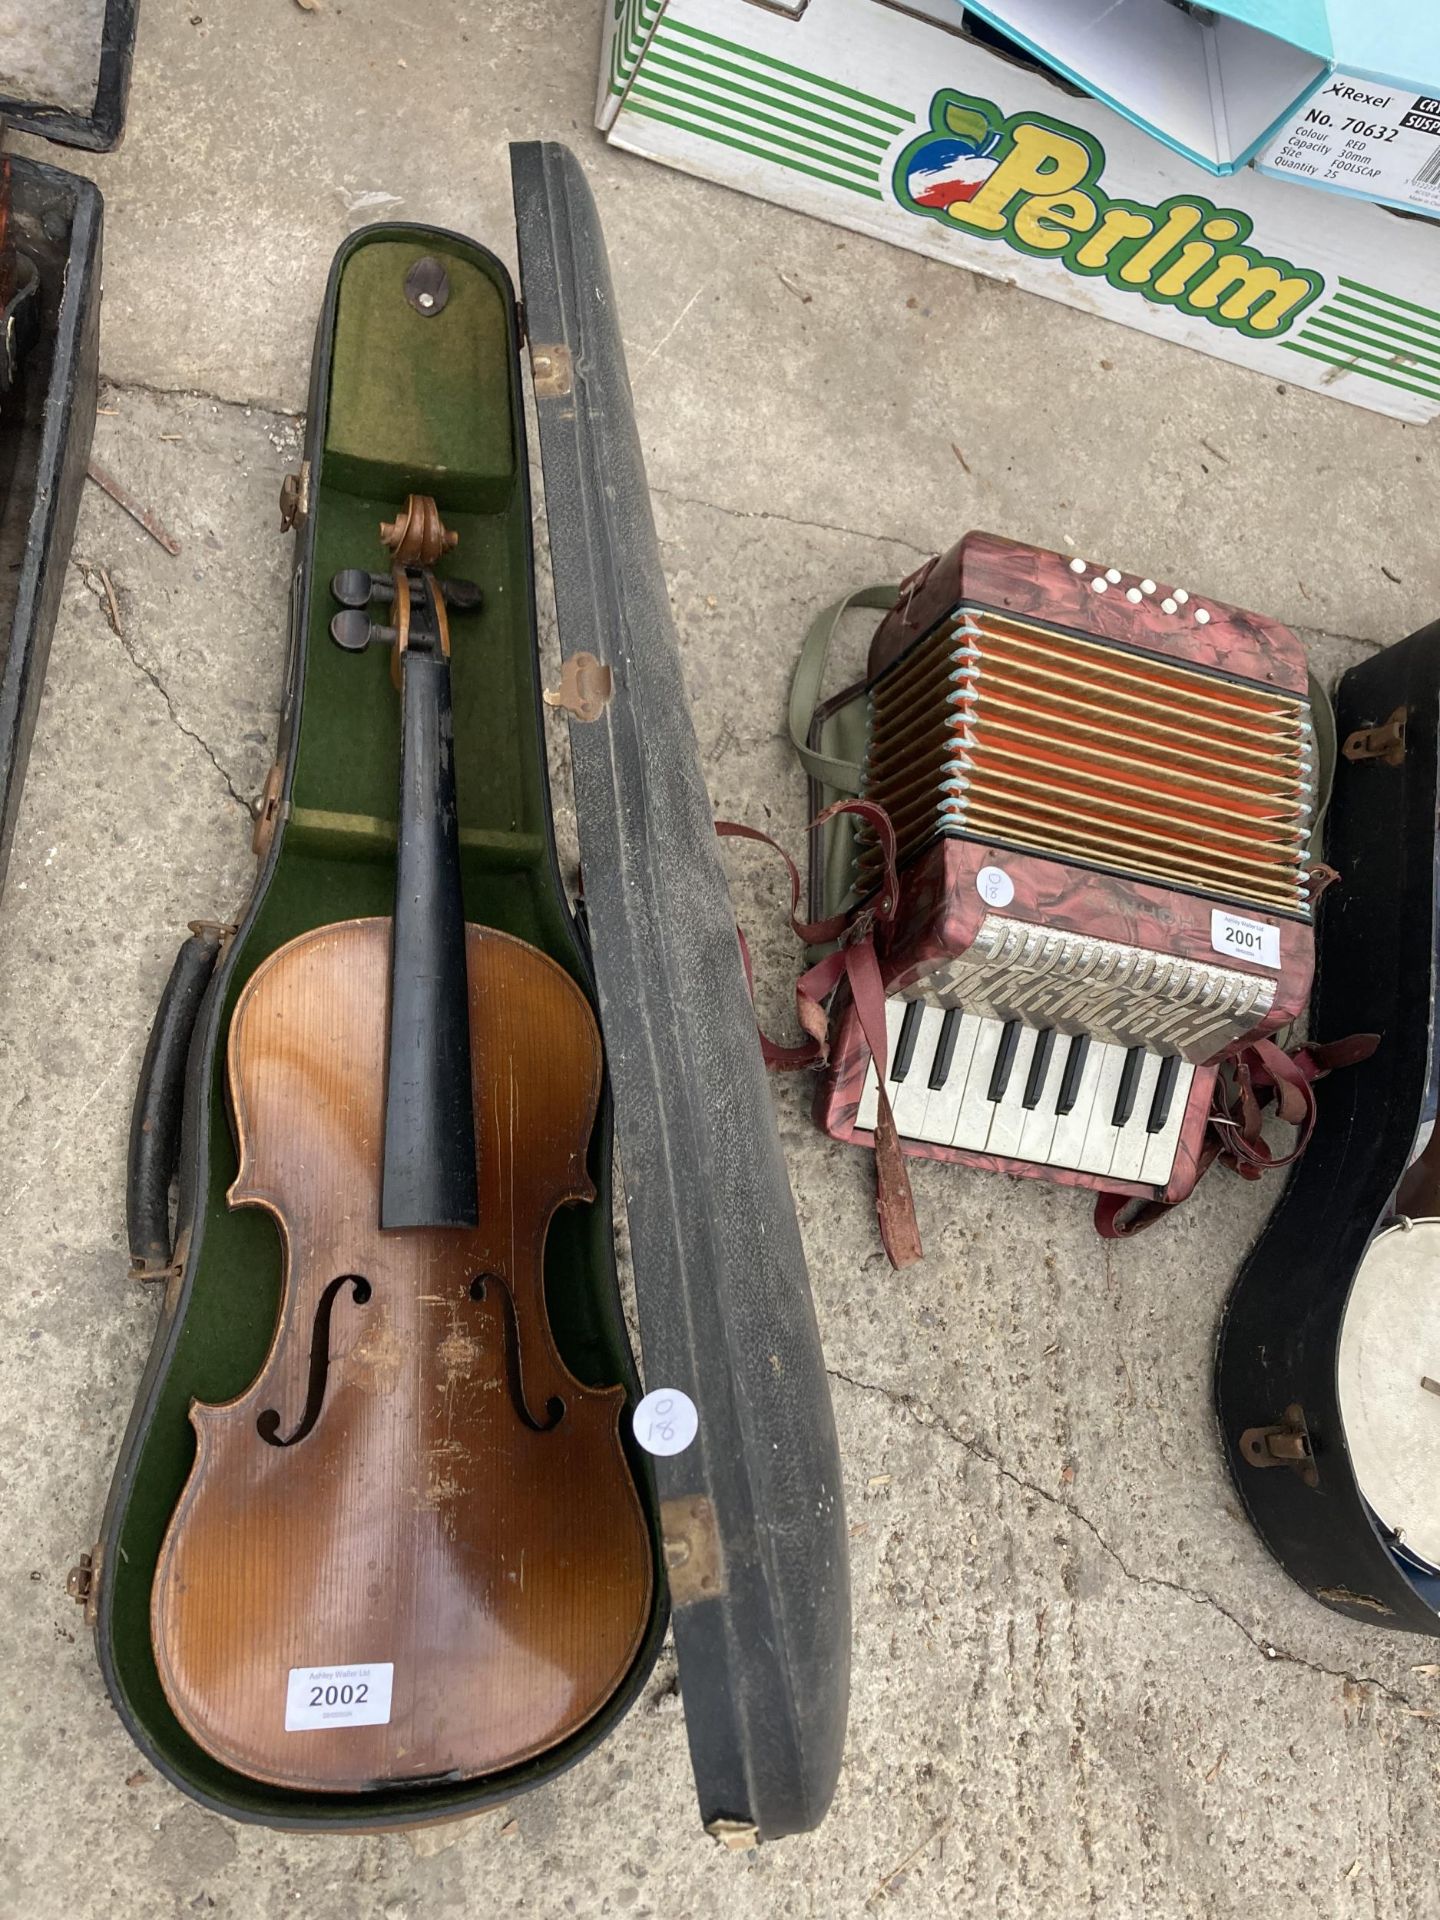 A VINTAGE VIOLIN FOR RESTORATION WITH A CARRY CASE